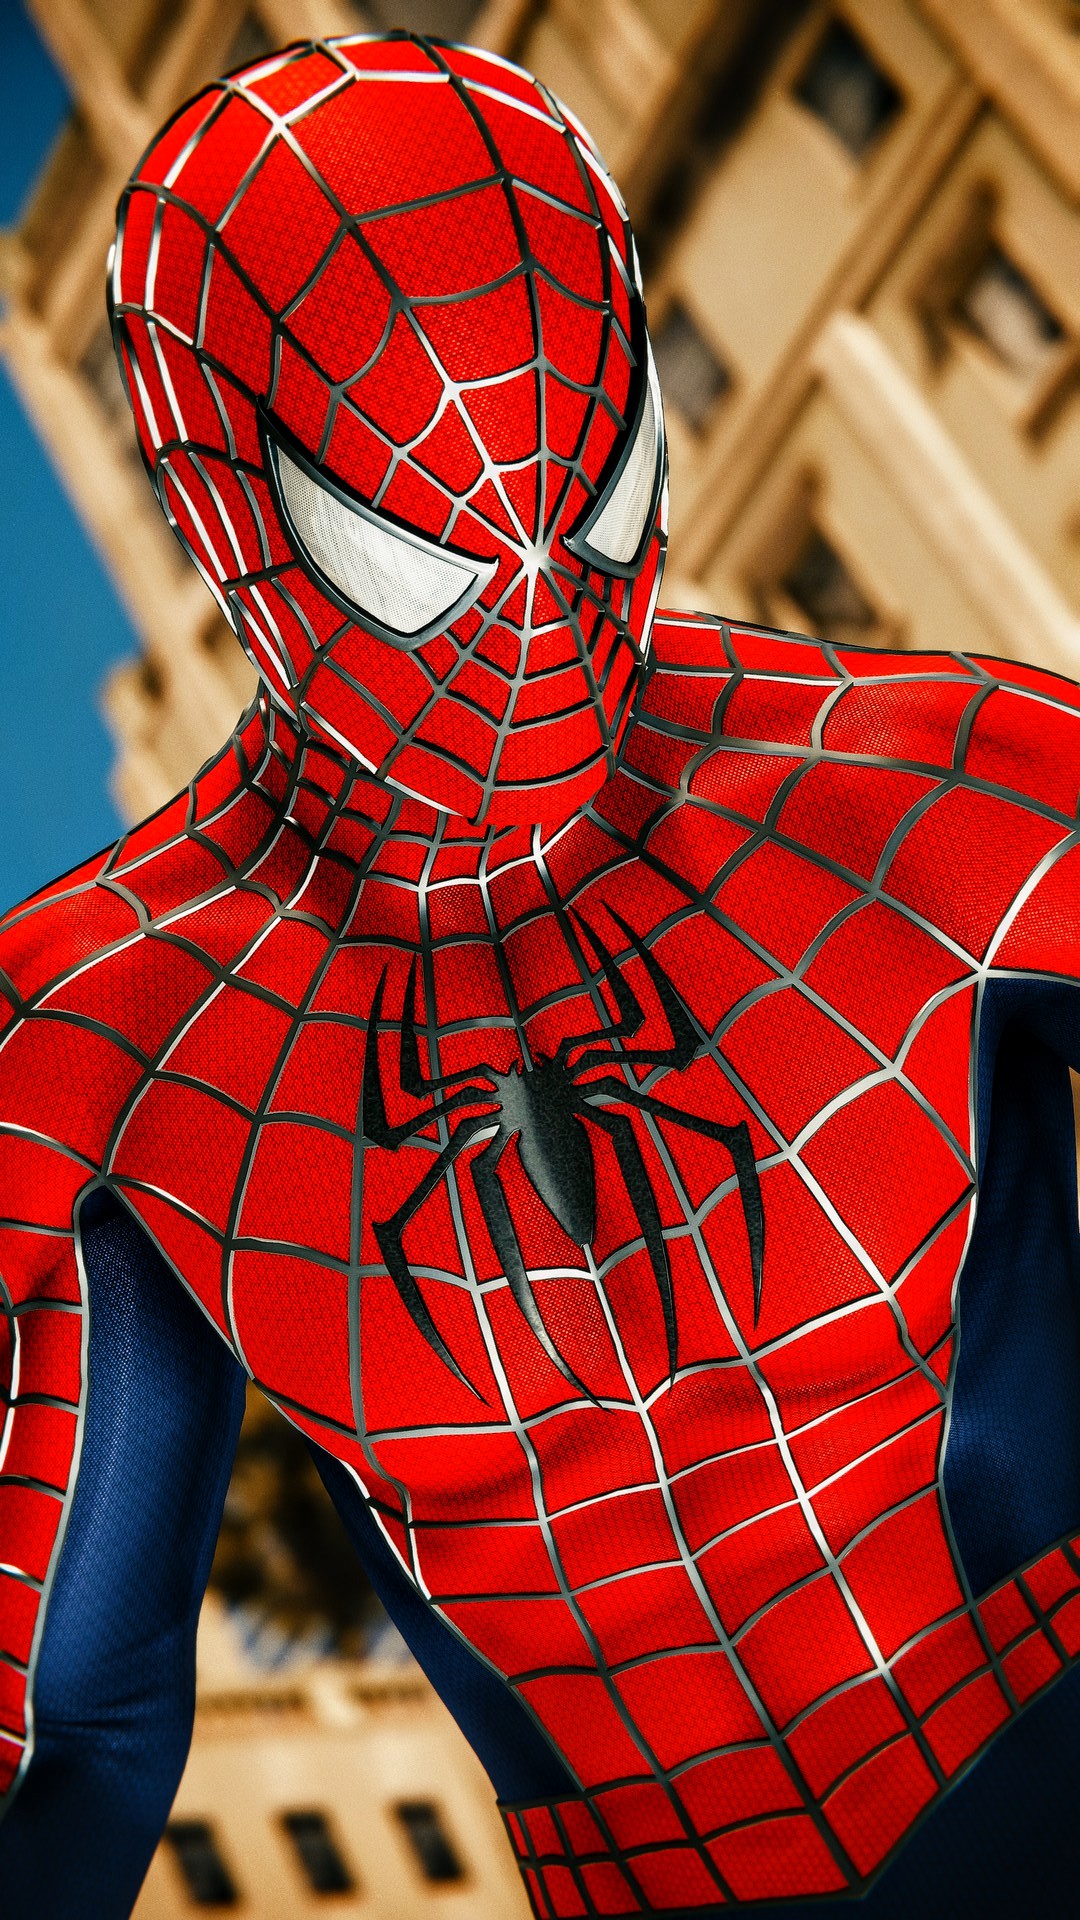 Raimi Spider-Fan no Twitter: "Spider-Man PS4 Raimi Suit pic by me. Best suit period. The colors and details are incredible. #spiderman #spidermanps4 #raimisuit #tobeymaguire #insomniacgames #photomode #spidermanphotomode @EARTH_96283 https://t.co ...